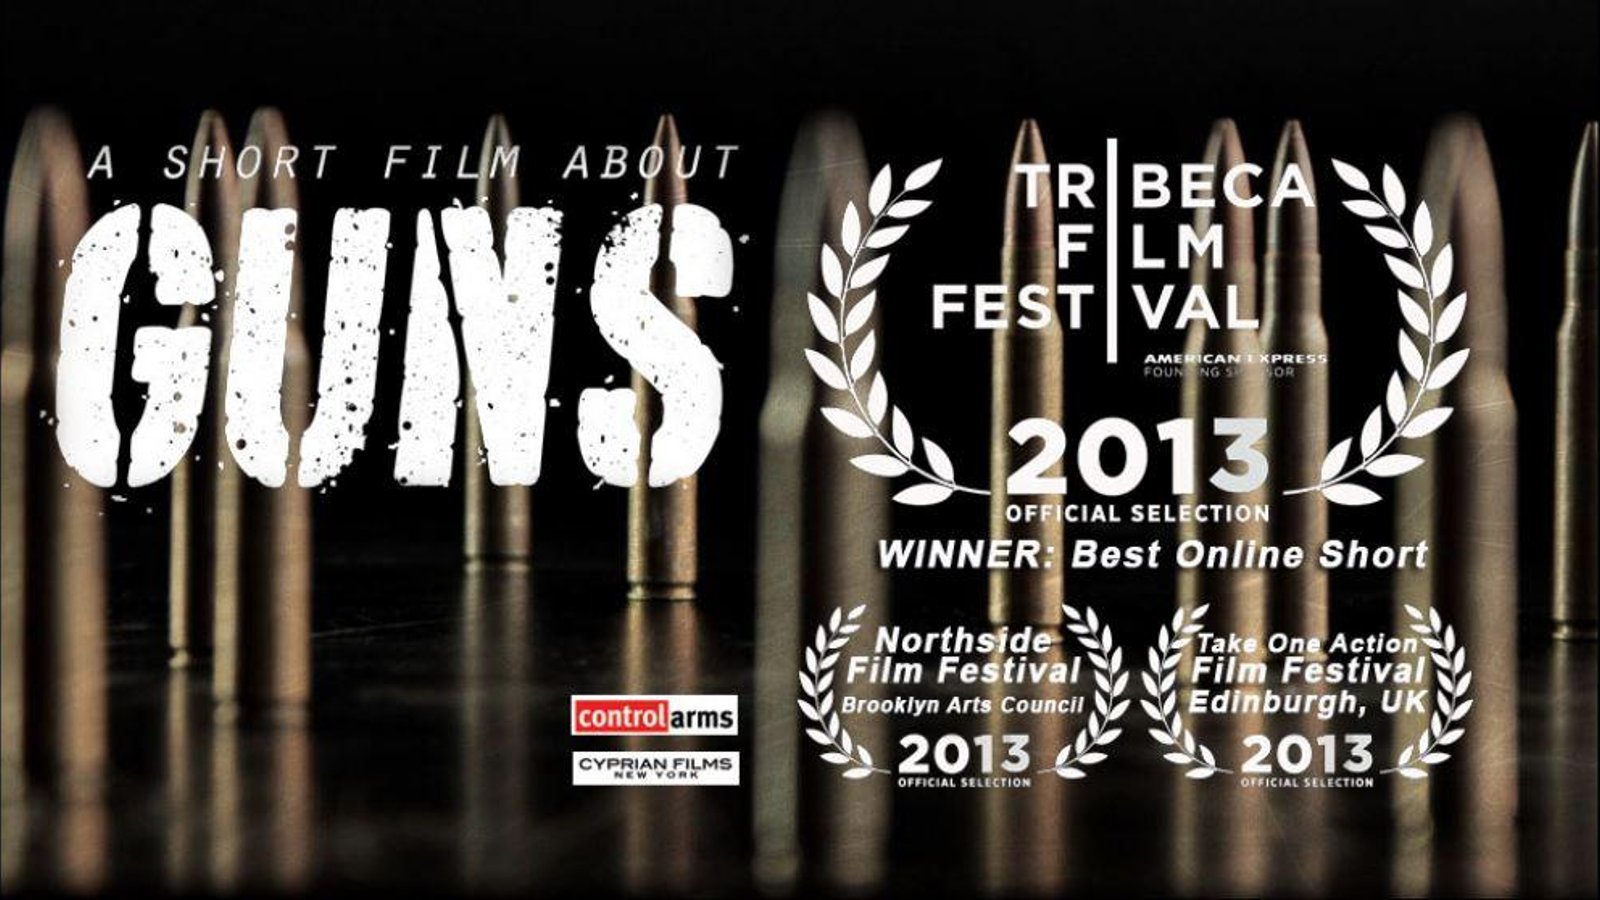 A Short Film About Guns - The Global Illegal Arms Trade